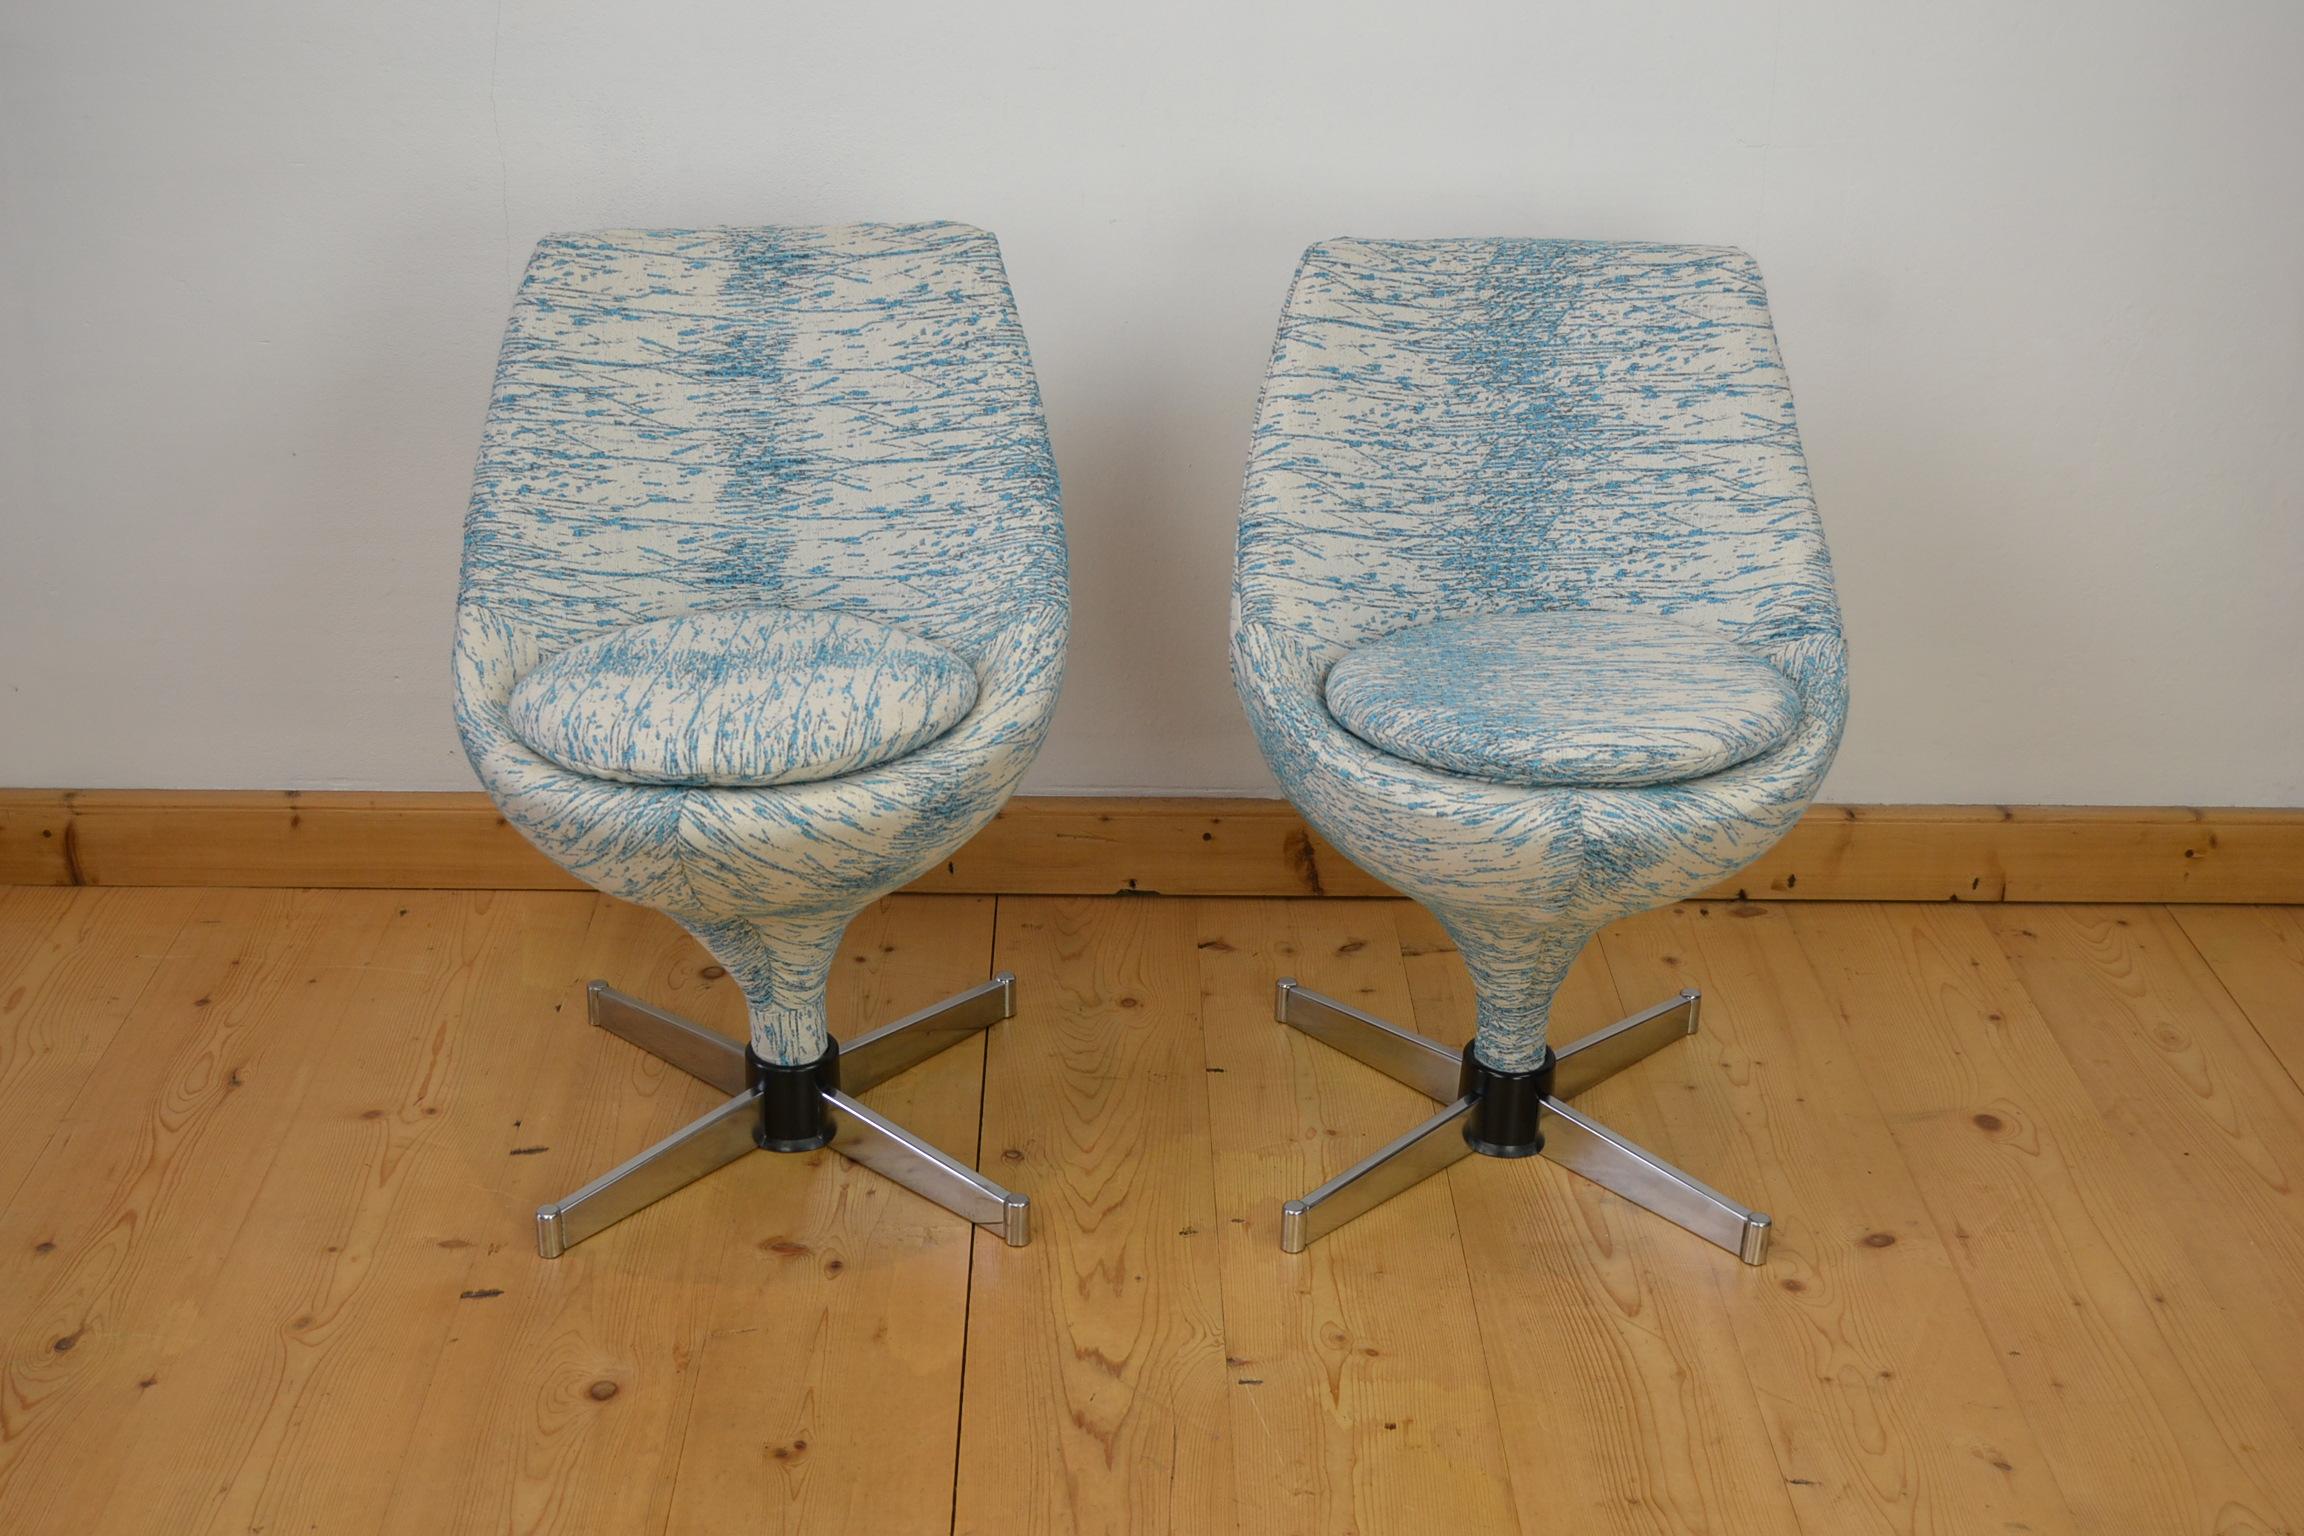 Pair of Blue Meurop swivel chairs designed by Pierre Guariche.
These Polaris lounge chairs date from the 1960s and were made for the Belgian Company Meurop.  Elegant tulip chairs with chromed base and with new upholstery in blue and white flamed